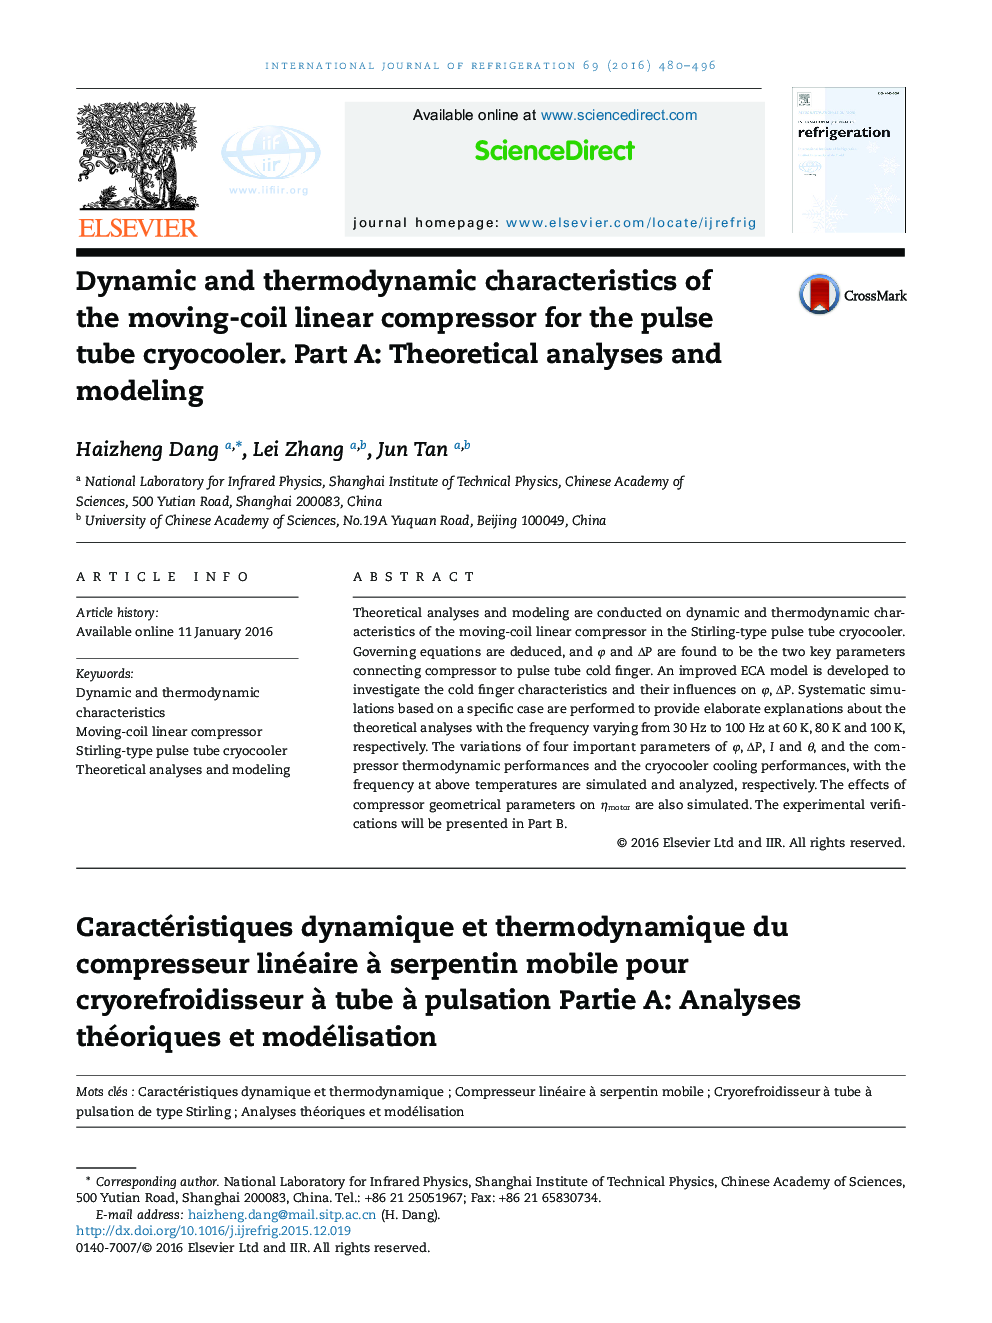 Dynamic and thermodynamic characteristics of the moving-coil linear compressor for the pulse tube cryocooler. Part A: Theoretical analyses and modeling